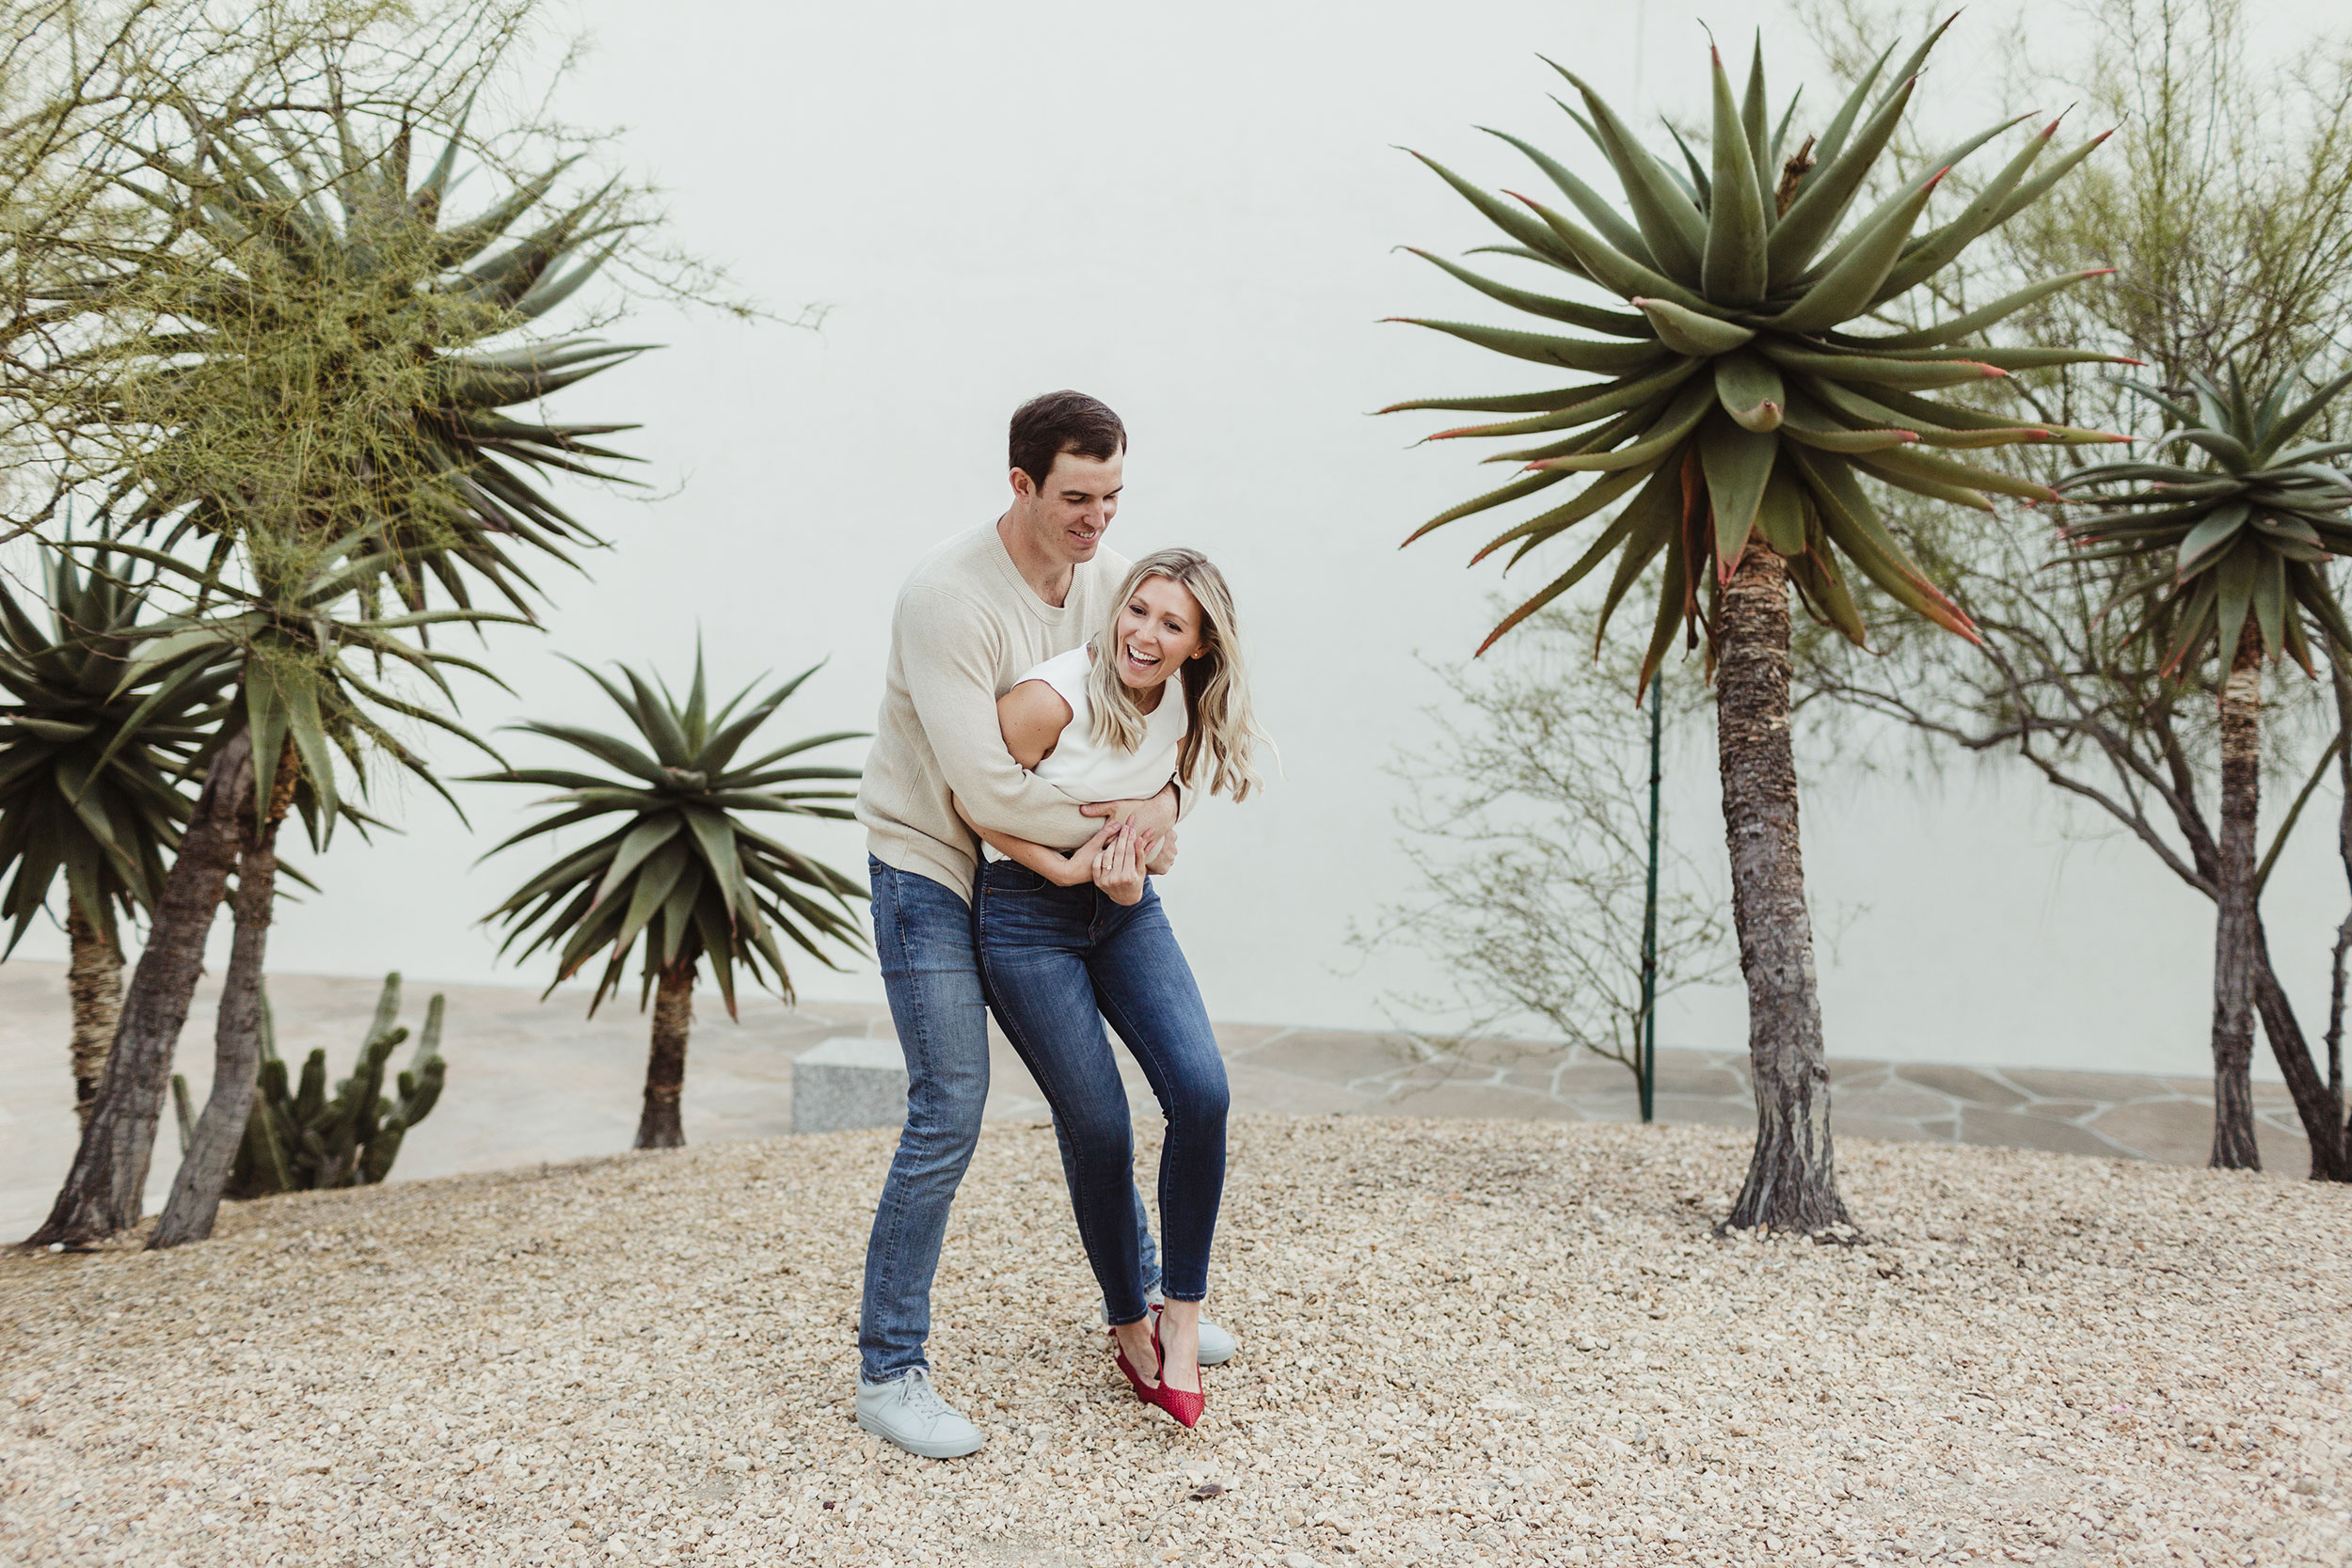 Noguchi Garden And Crystal Cove Engagement